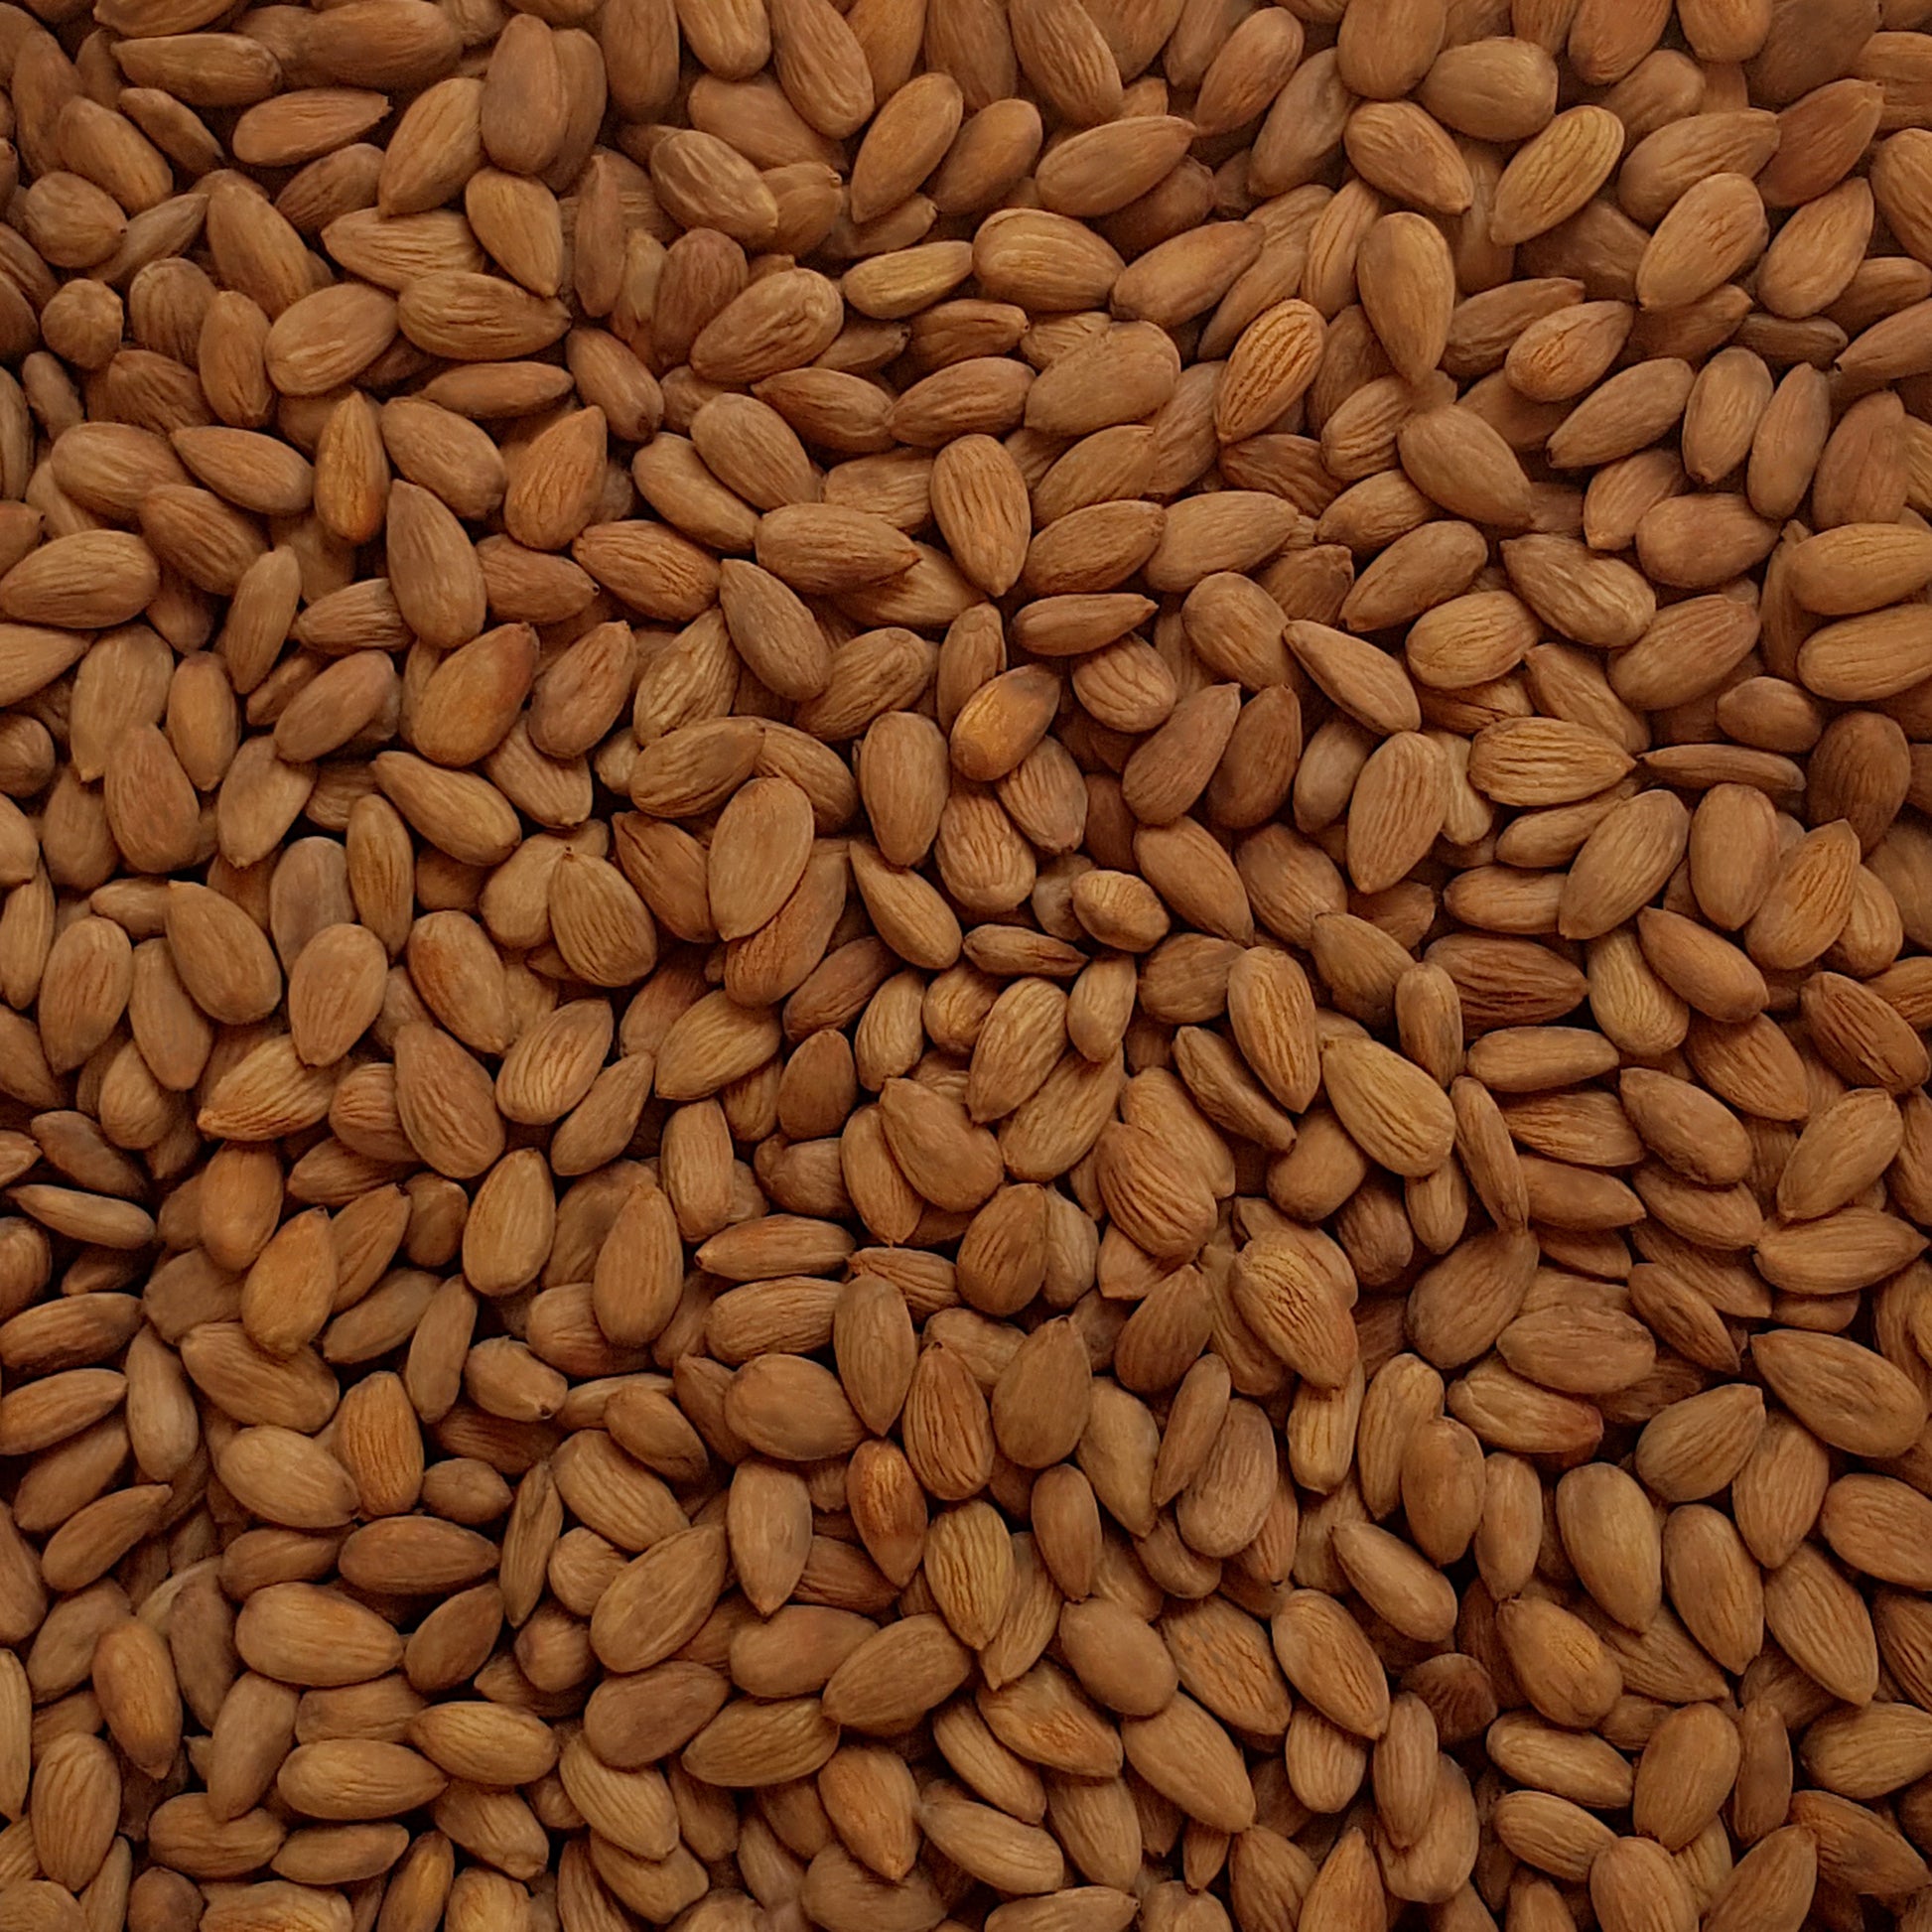 Full frame overhead image of BY NATURE Tamari Soy Sauce Almonds - raw, activated, dried not roasted.